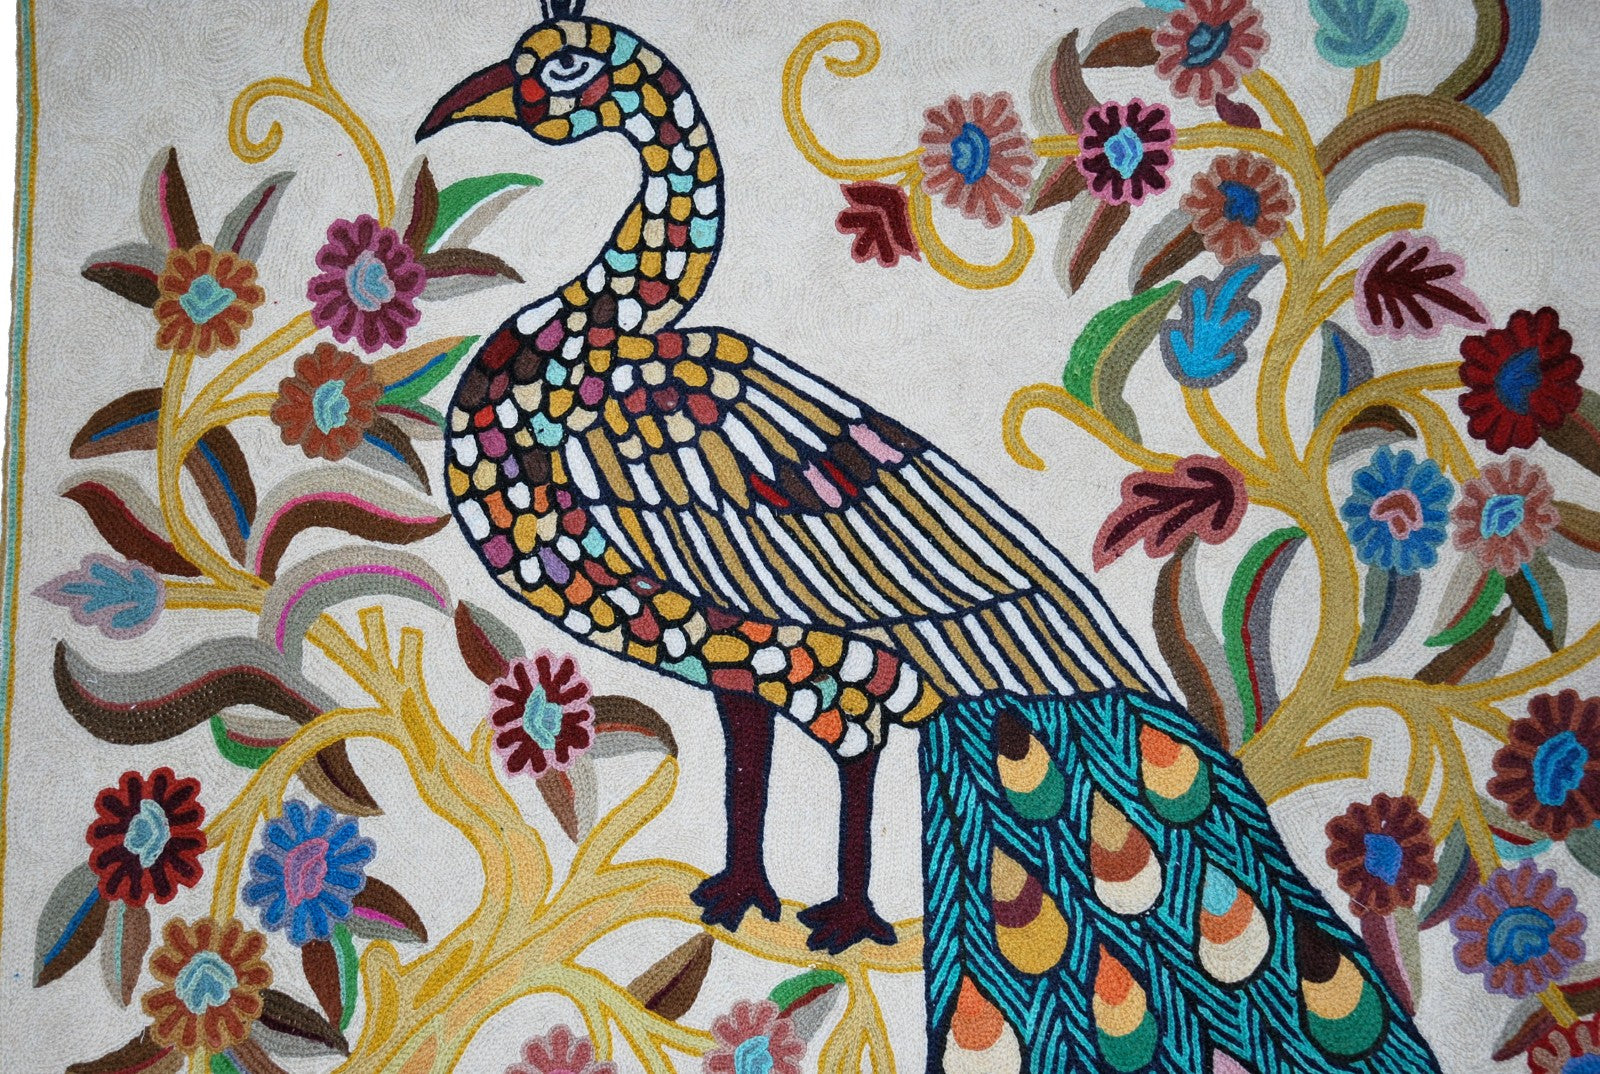 Kashmiri Wool Tapestry Area Rug "Peacock", Multicolor Embroidery 3x5 feet #CWR15120